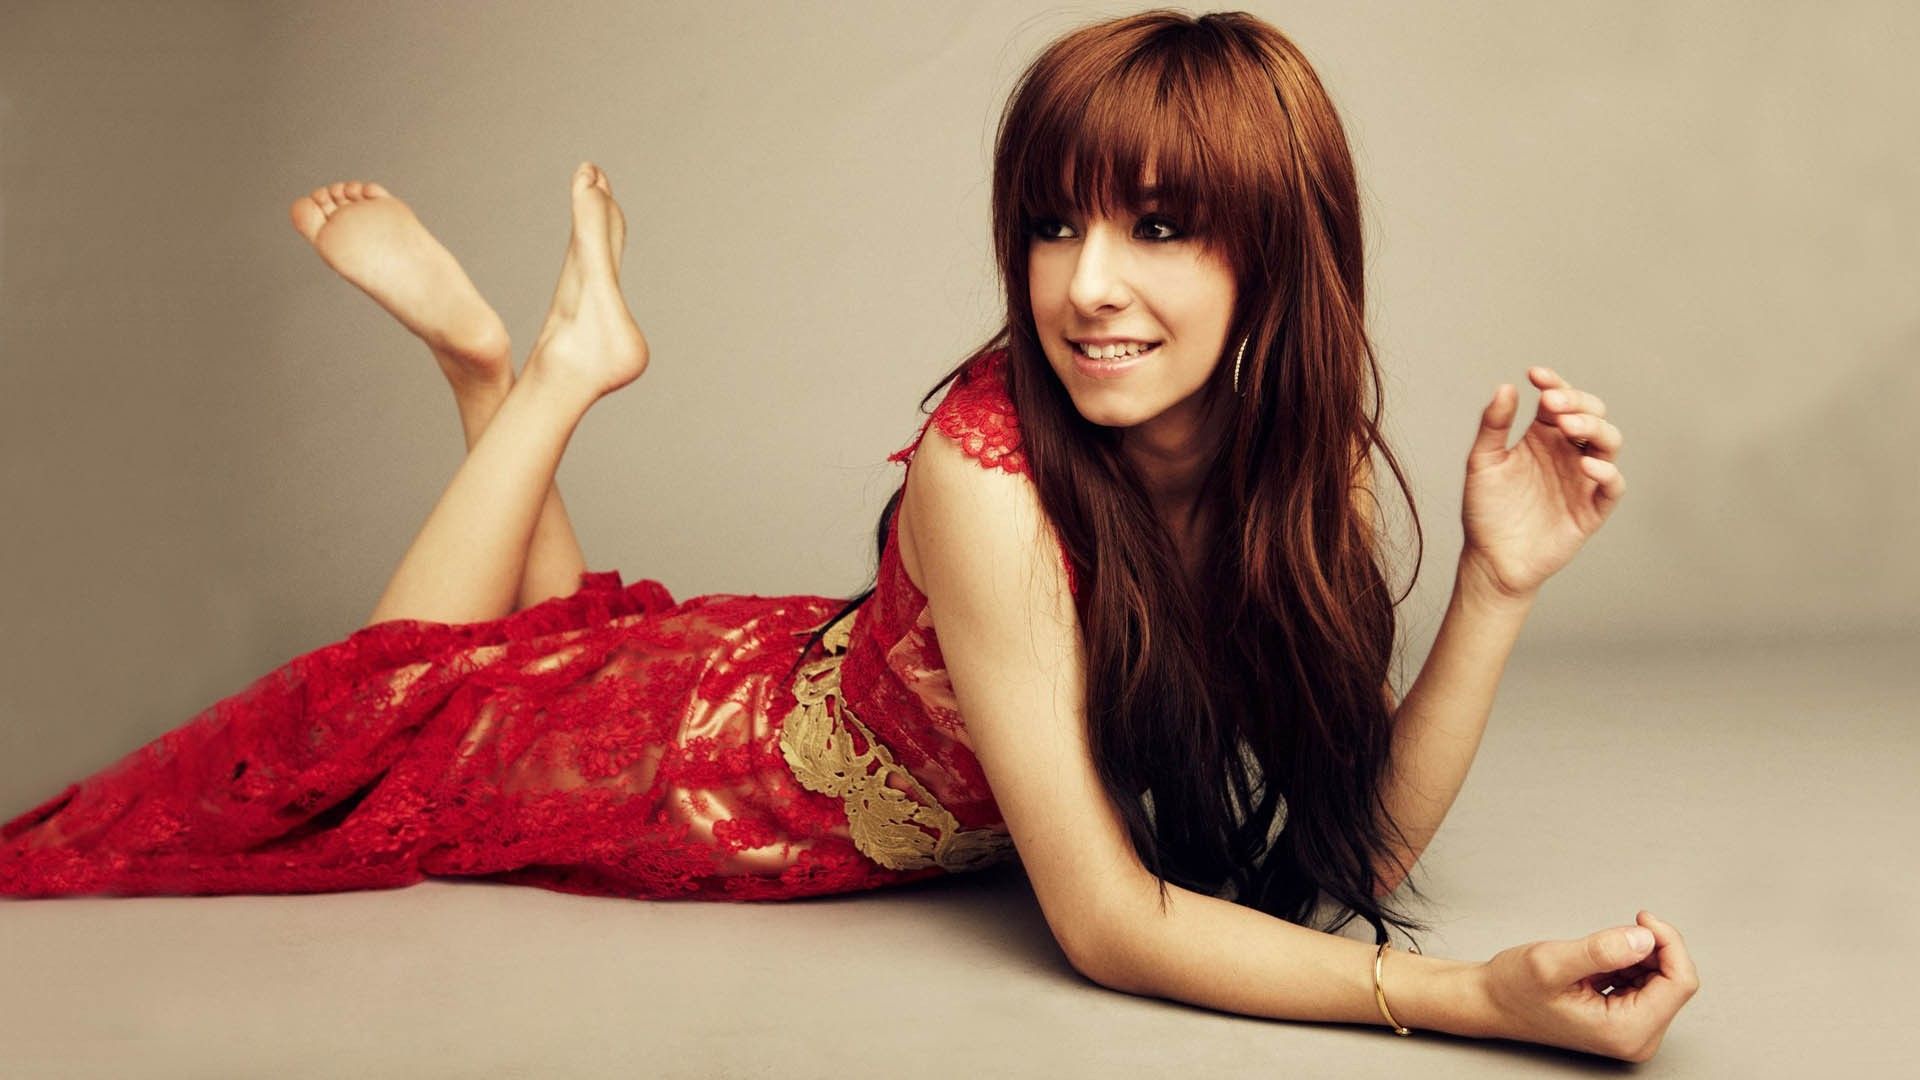 Model Christina Grimmie wallpapers and images - wallpapers ...